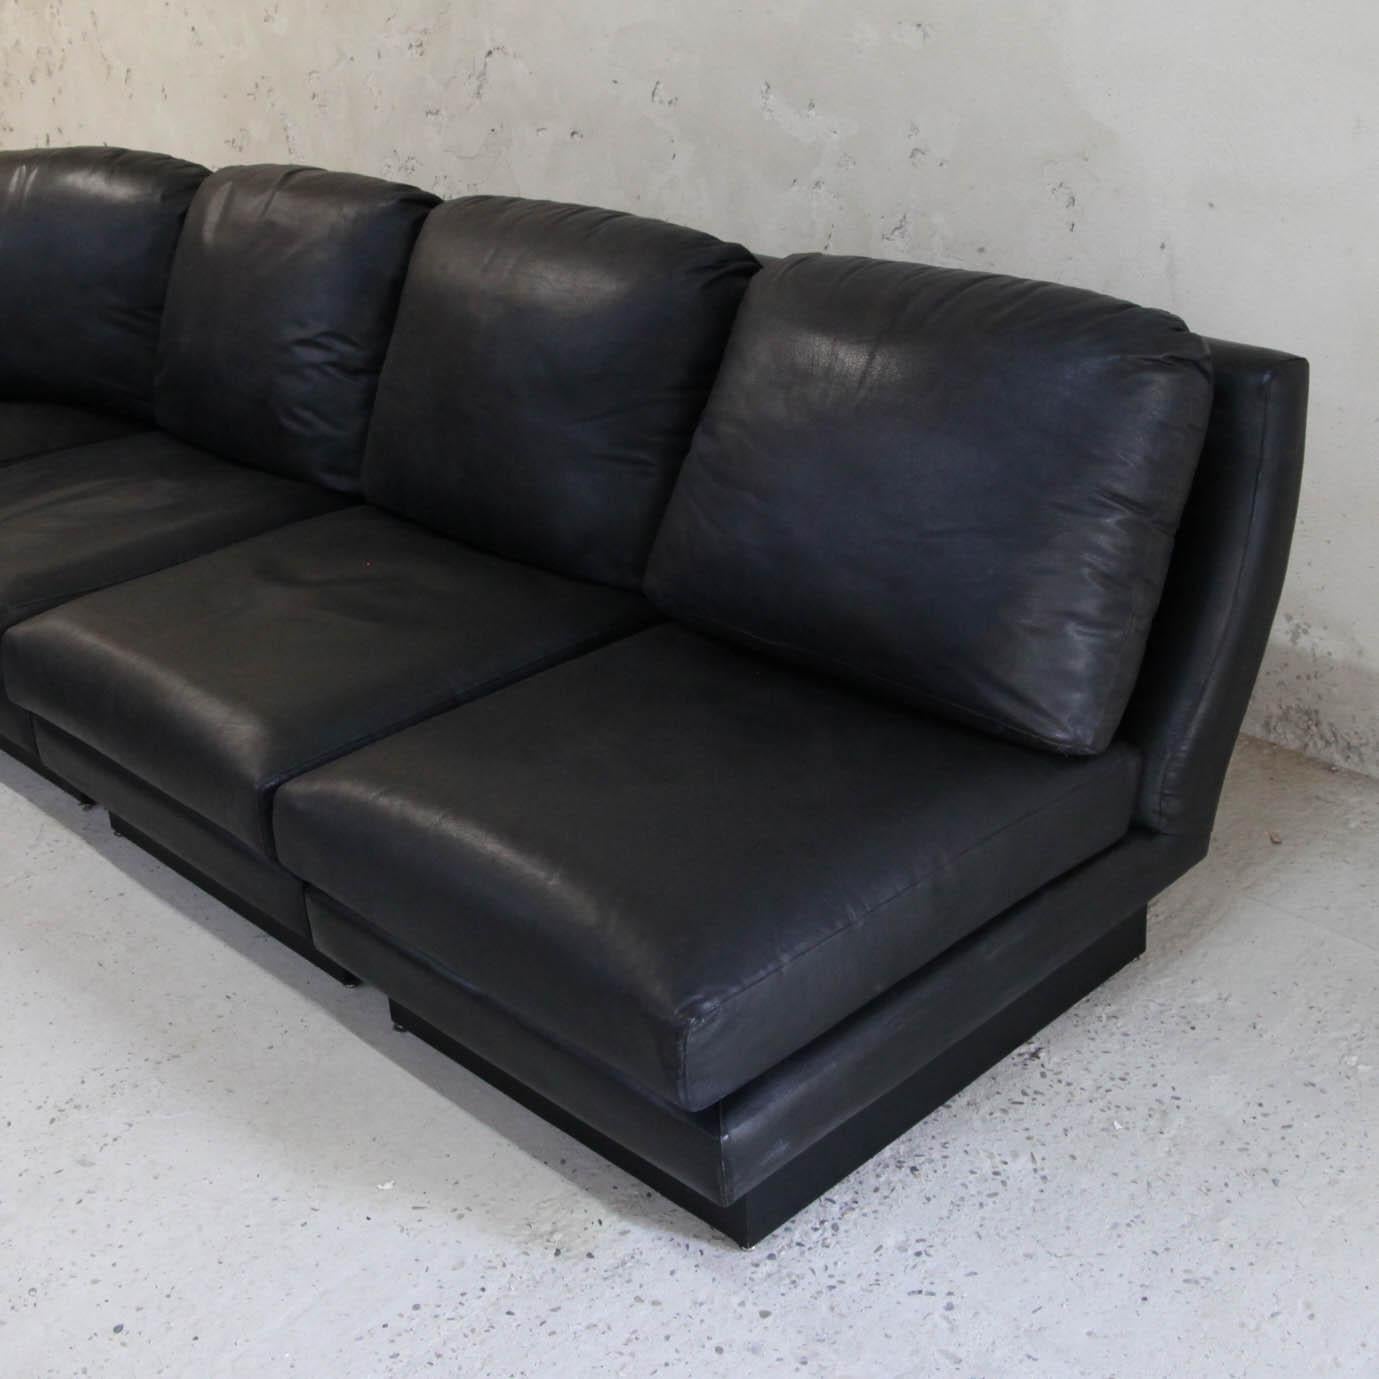 Rare Vintage Sofa in Black Leather and Laminated Signed Willy Rizzo 2